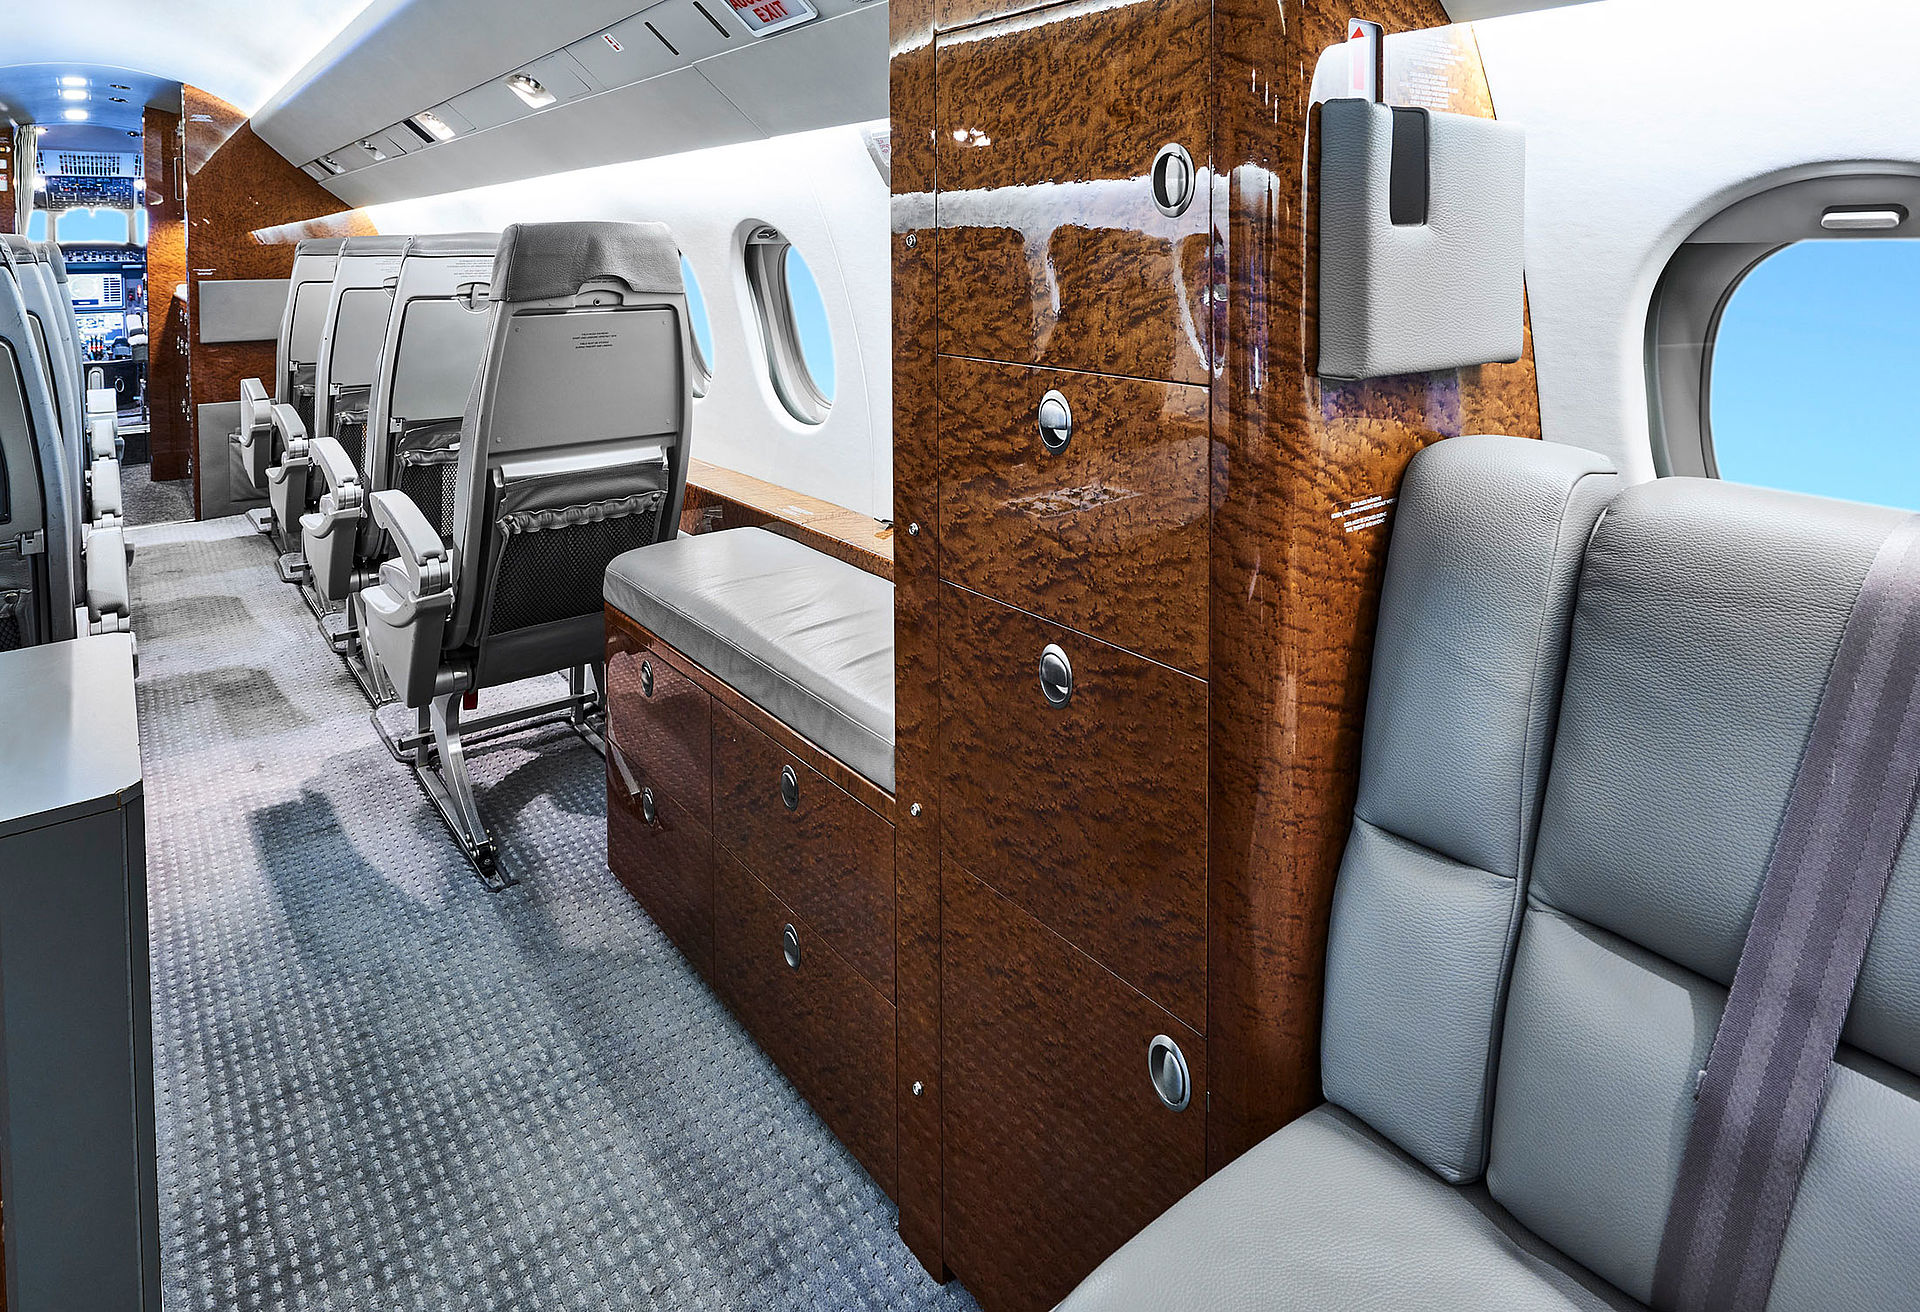 Small cabinet R/H in mid cabin partition | Aero-Dienst Aircraft Sales